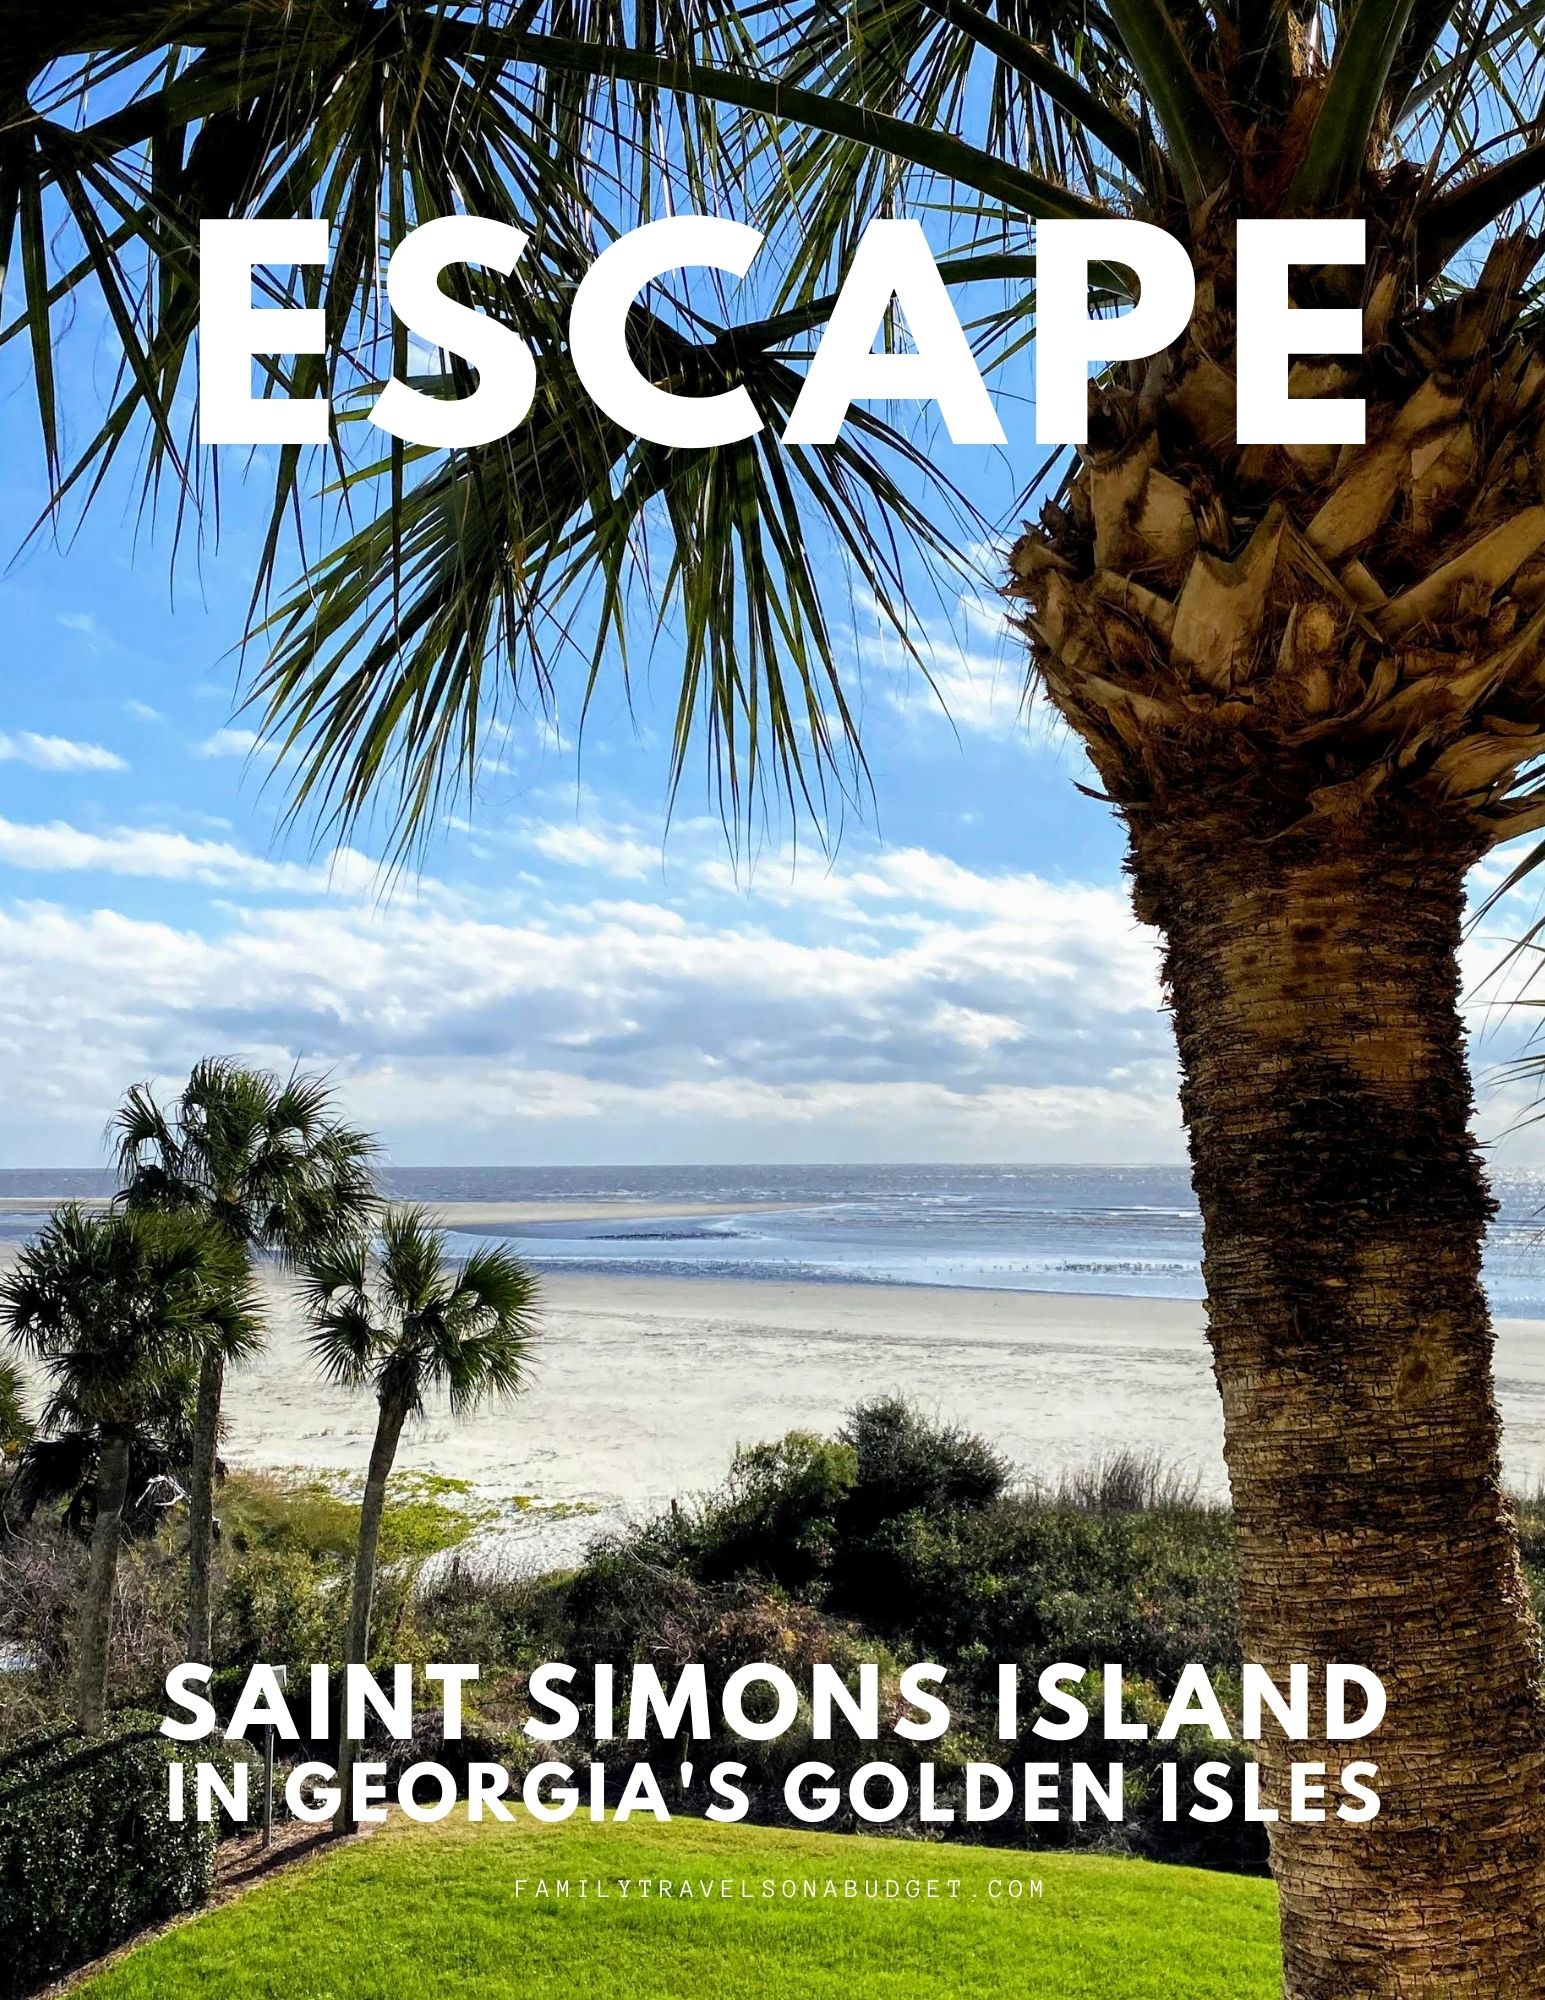 For the ultimate beach vacation without the crowds, head to St. Simons Island in Georgia. With great lodging, fabulous restaurants, and loads to do -- not to mention miles of wide, sandy beaches -- St. Simons is the place for you! #stsimonsisland #stsimonsislandgeorgia #thingstodoonstsimonsisland #stsimonslislandlighthouse #thingstodoingeorgia #usvacation #usvacationforcouples #beachvacation #bestusbeaches #romanticgetaways via @karendawkins